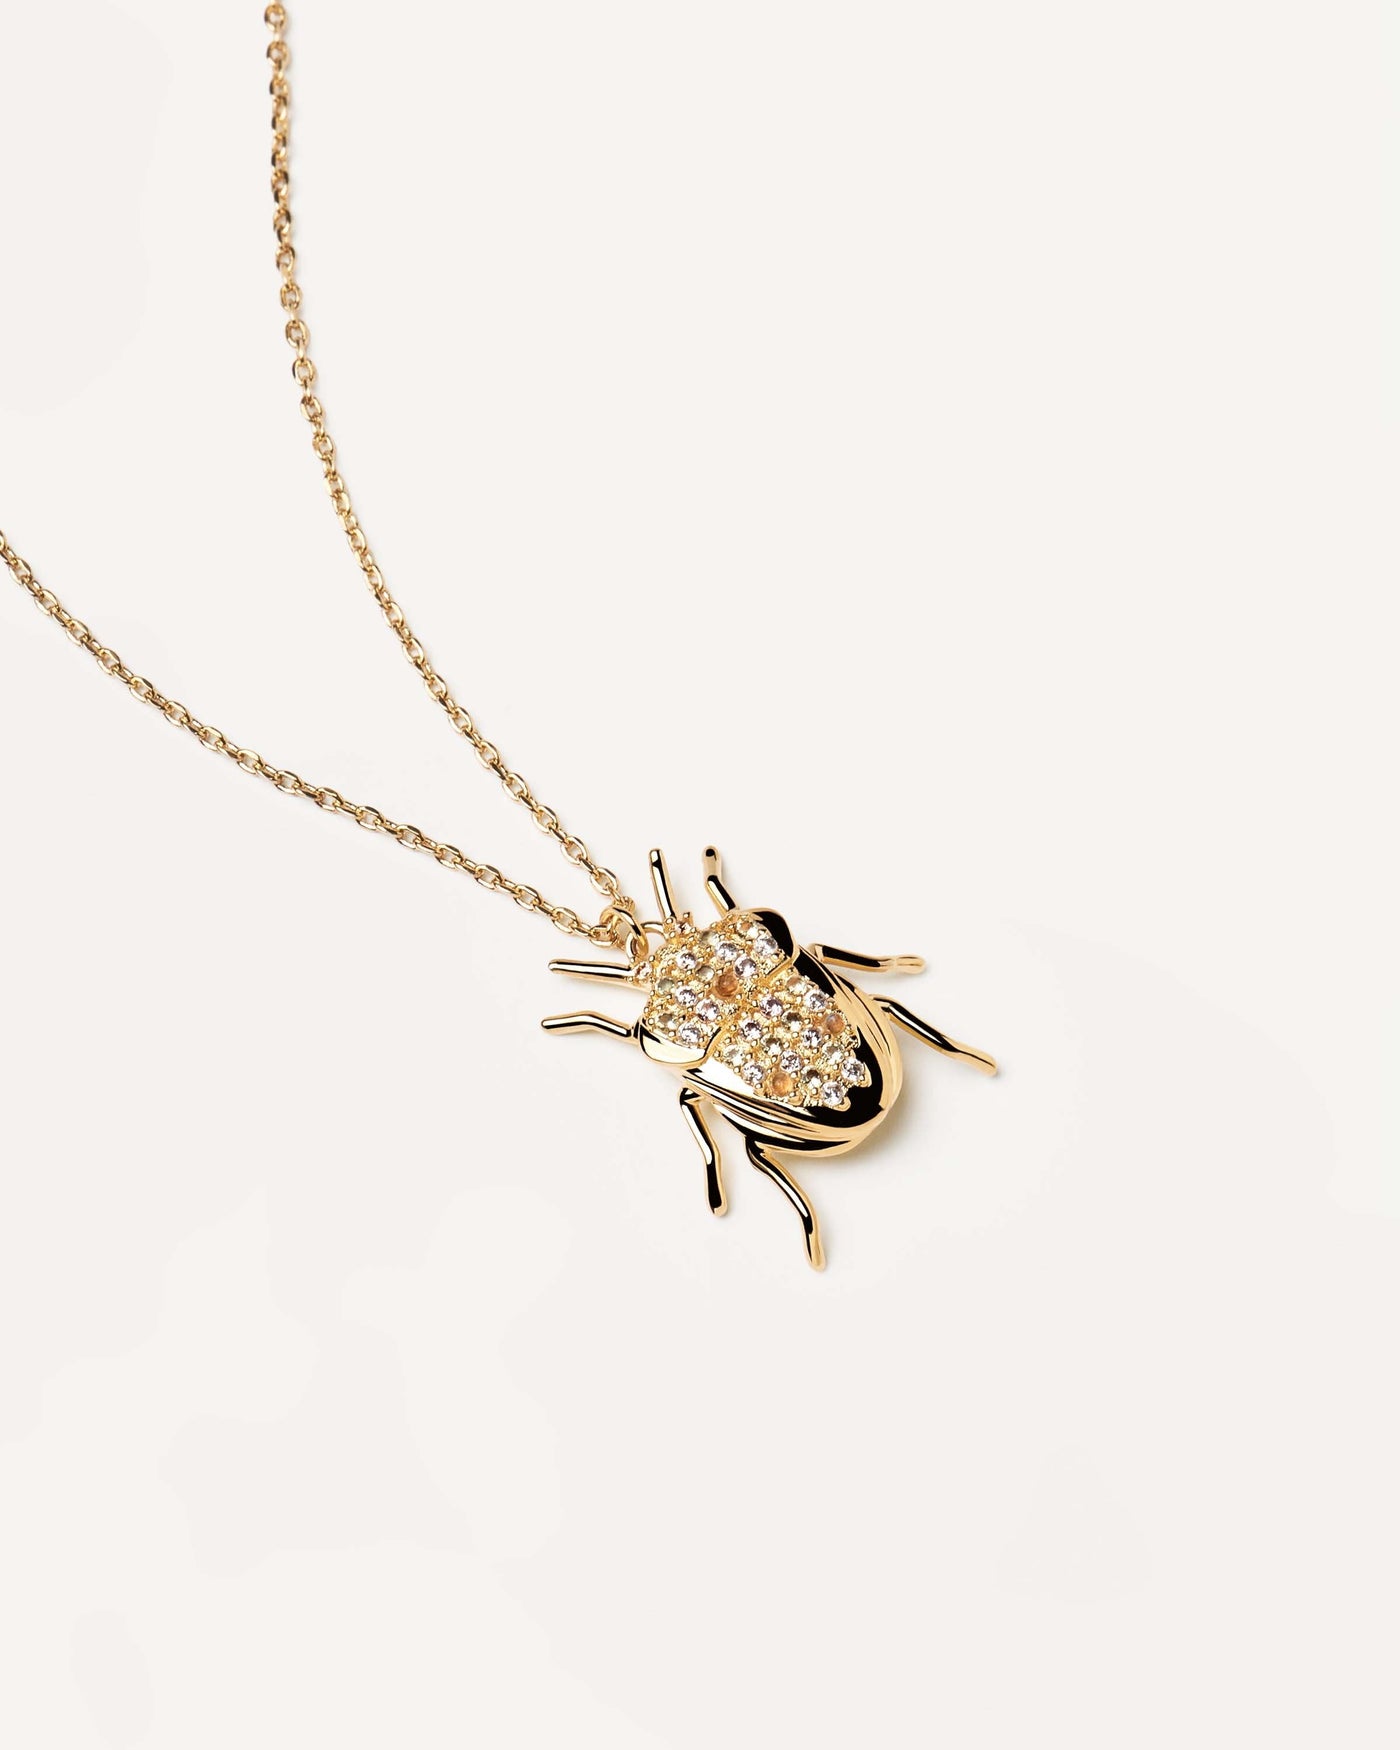 2023 Selection | Luck Beetle Gold Necklace. Get the latest arrival from PDPAOLA. Place your order safely and get this Best Seller. Free Shipping over 40€